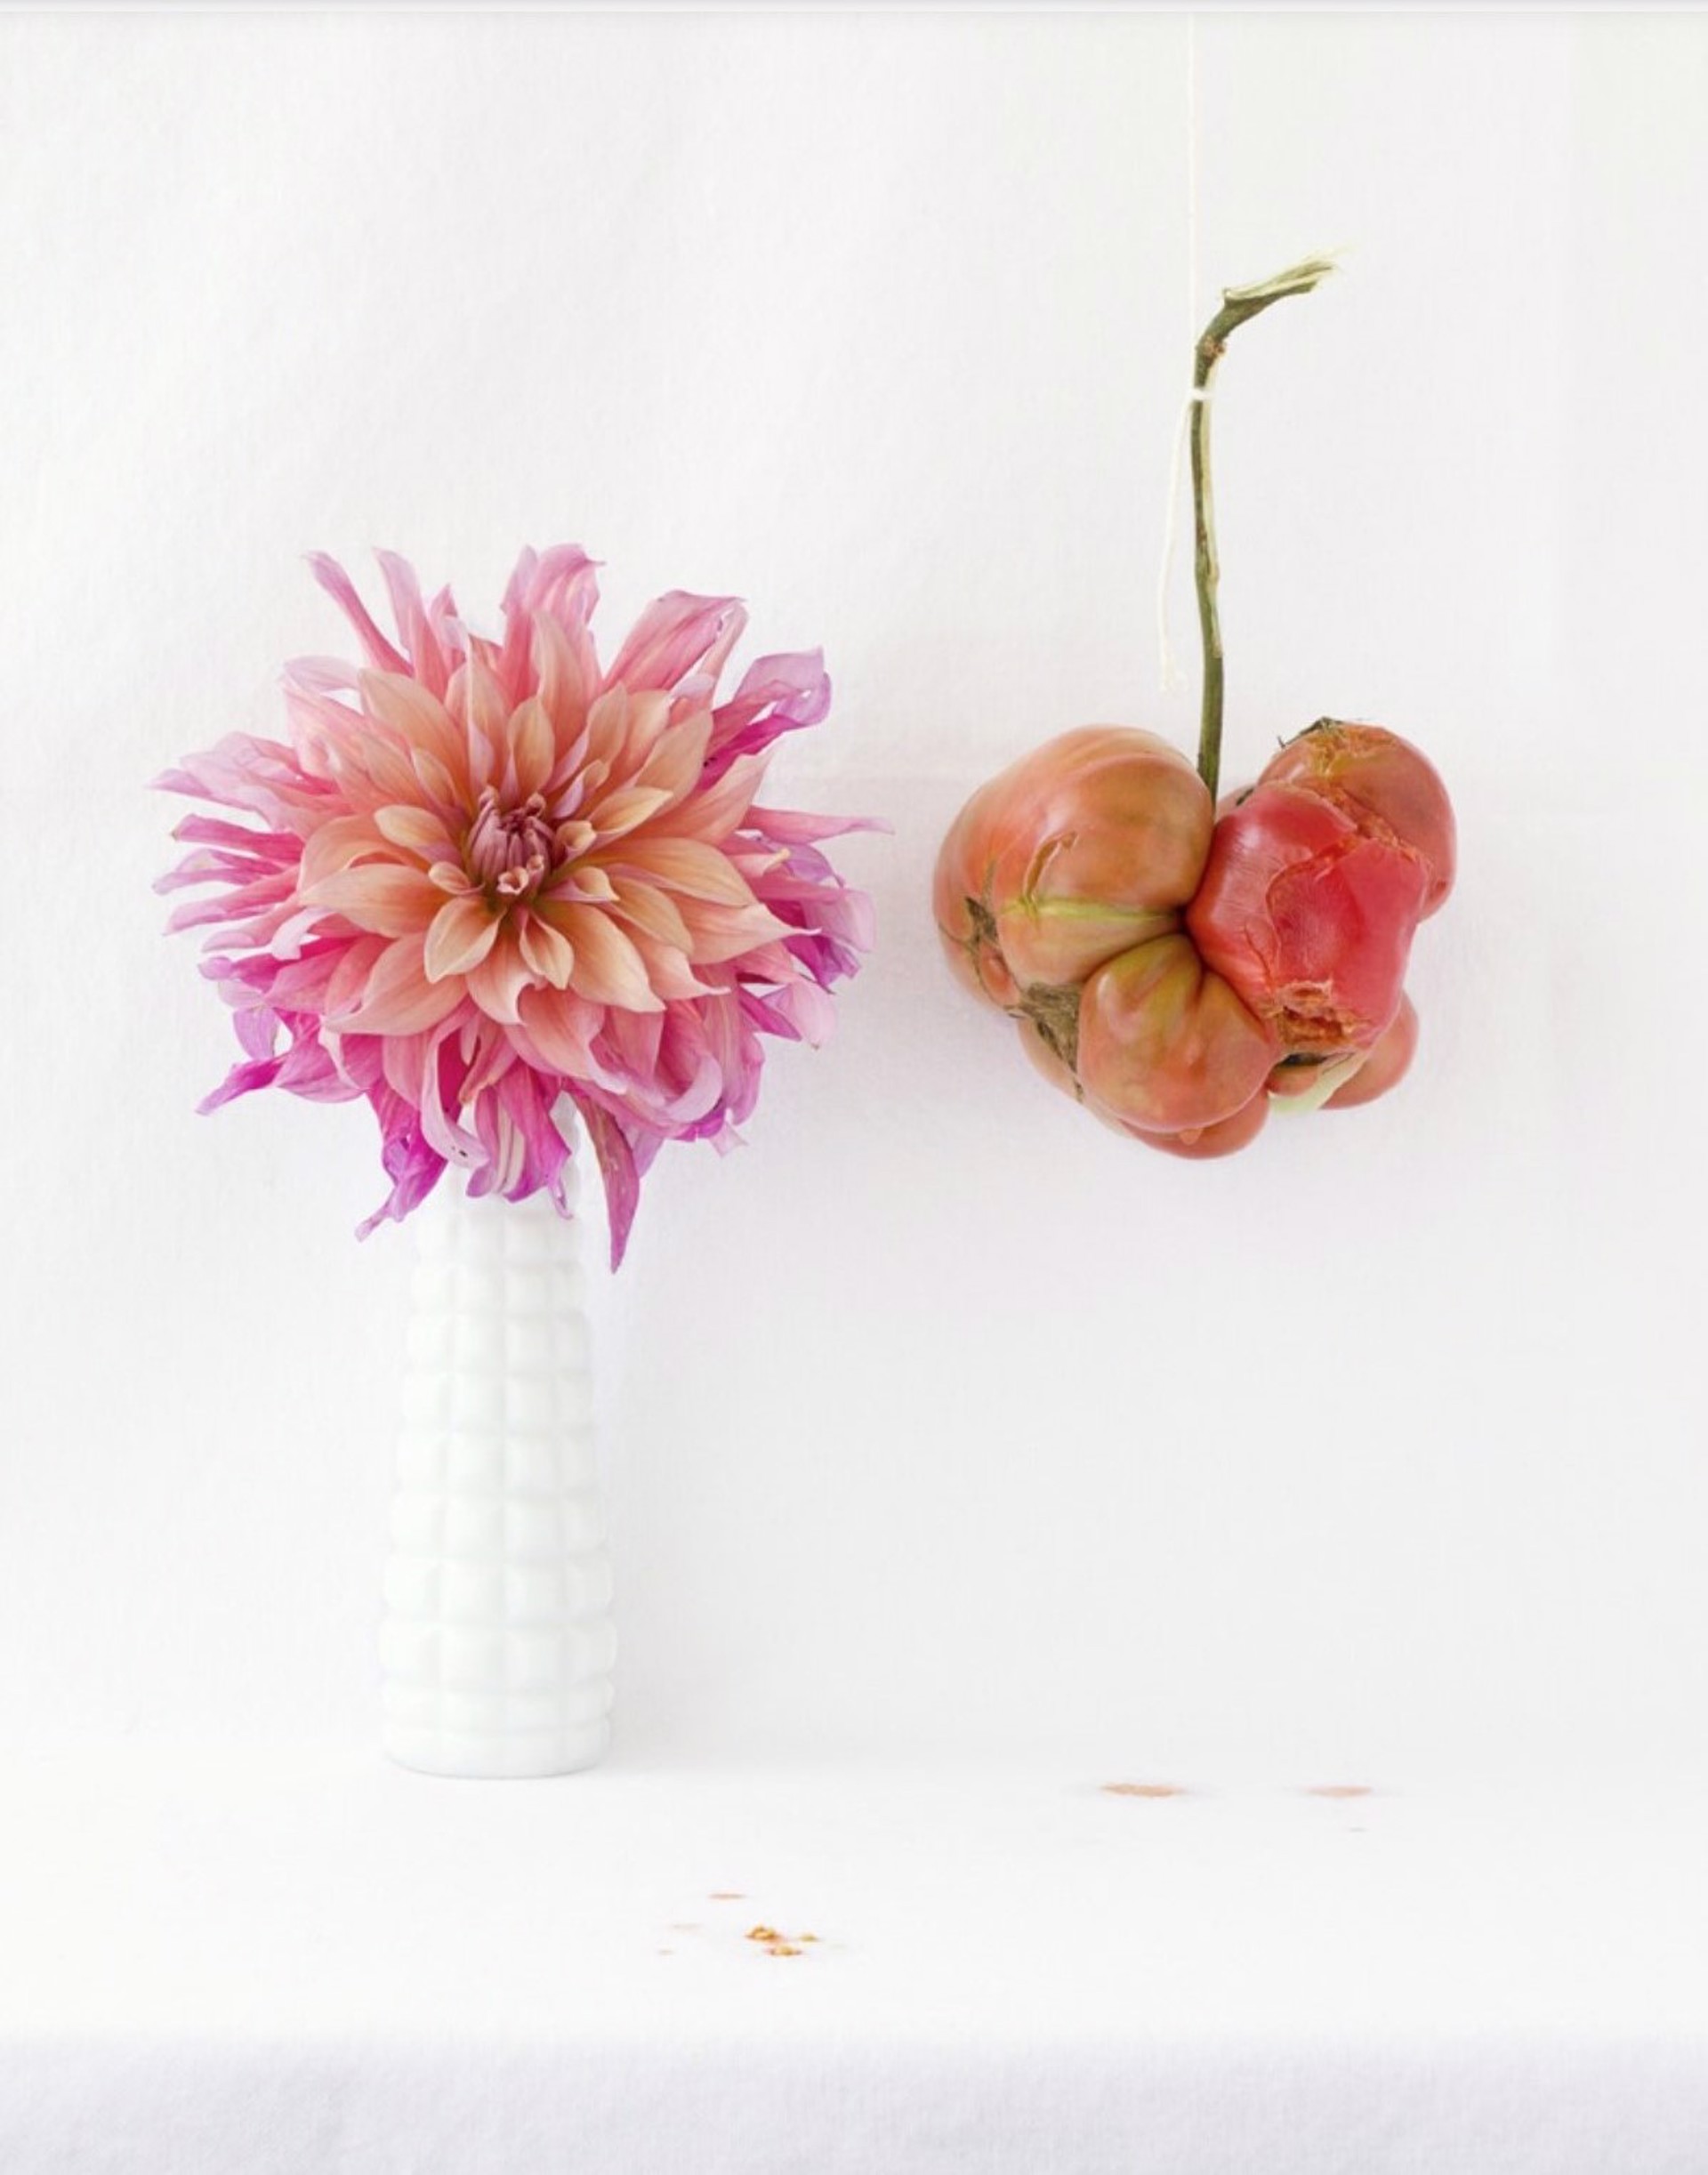 Still Life with Tomato and Dahlia by Kimberly Witham